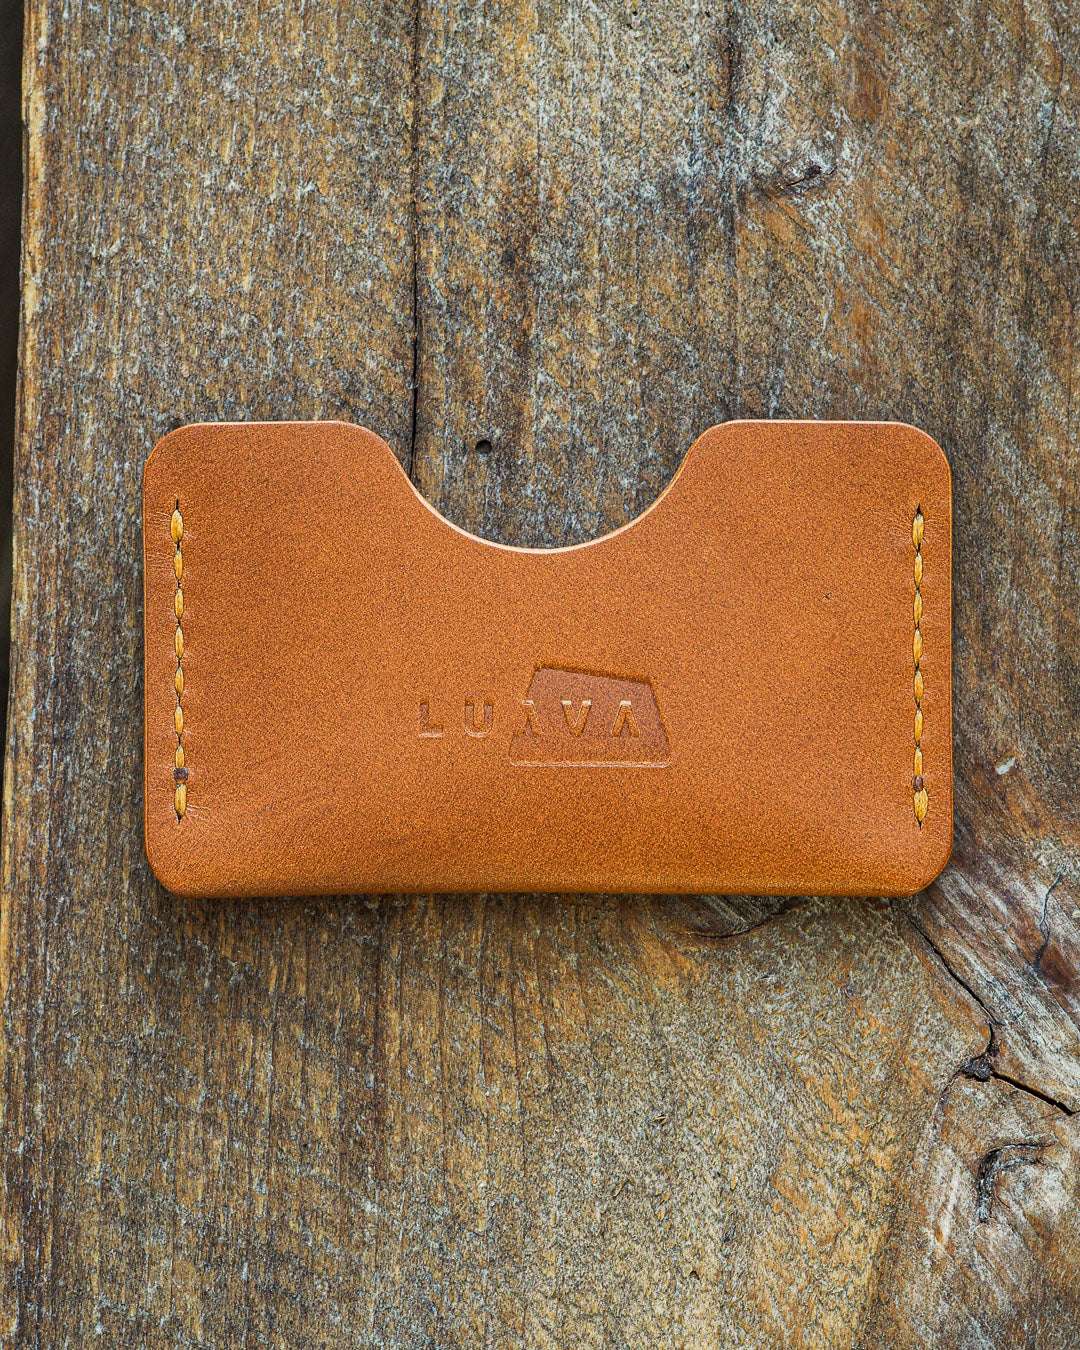 Luava handmade leather wallet handcrafted card holder cardholder made in finland absolute gold koala cognac thread back